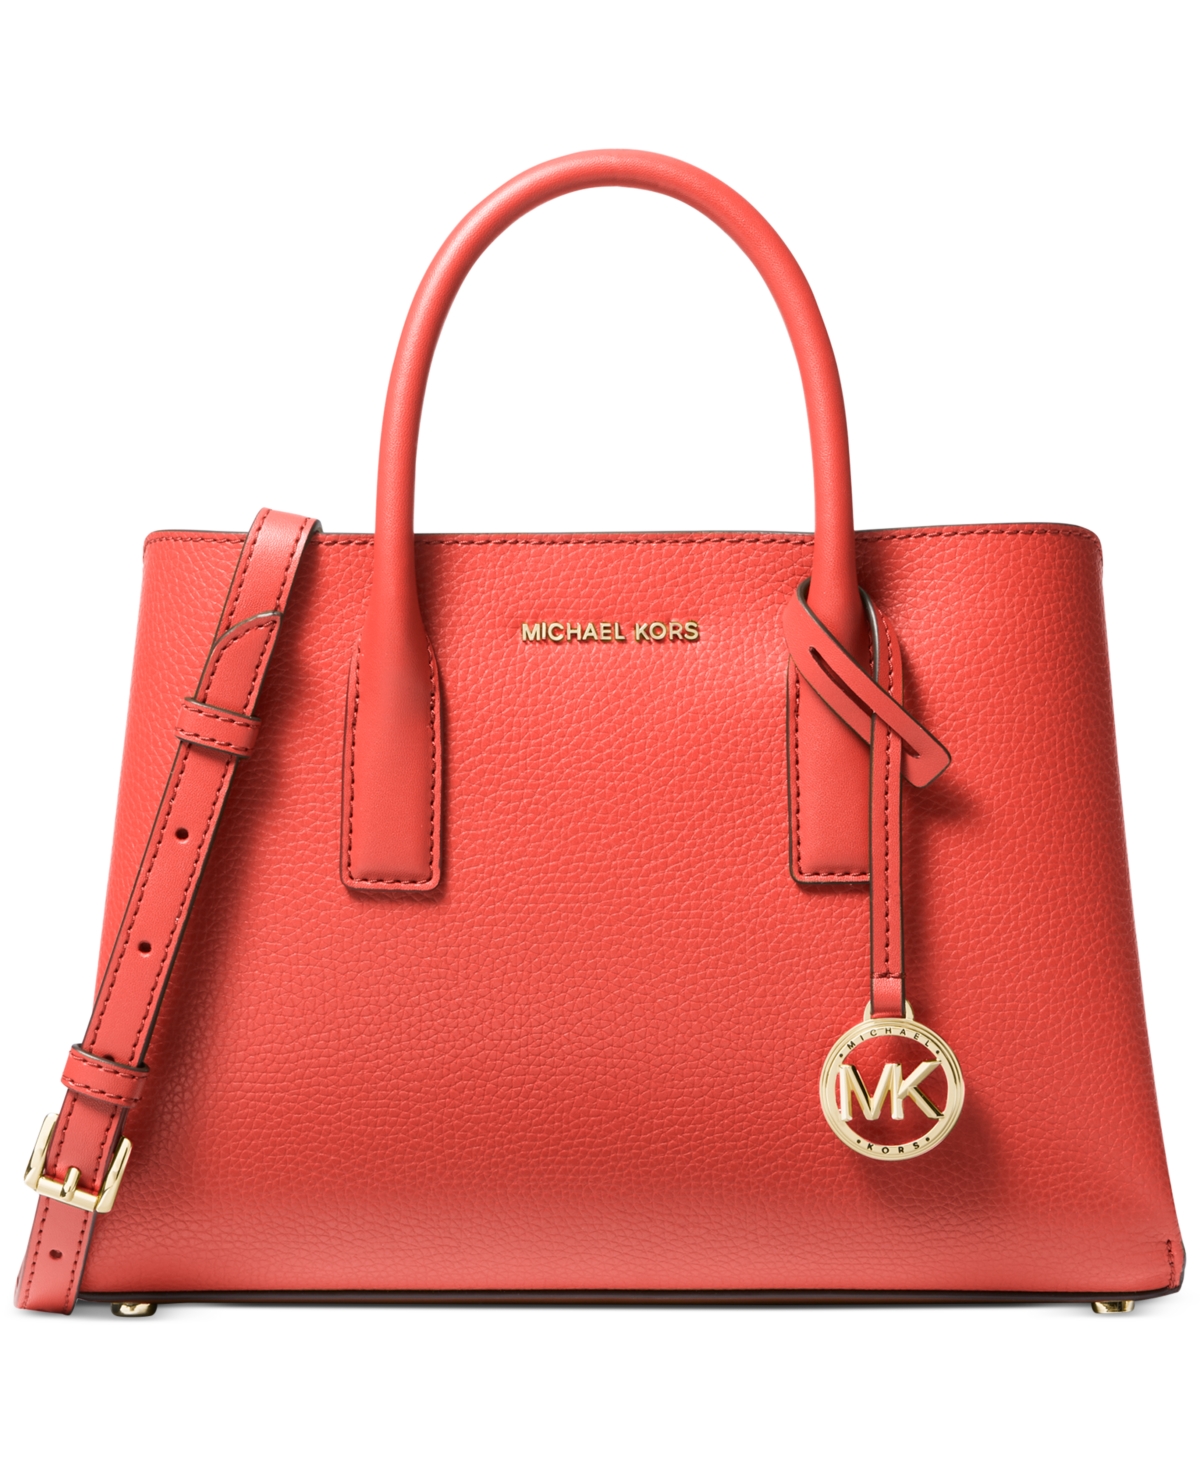 Michael Michael Kors Ruthie Small Leather Satchel - Spiced Coral